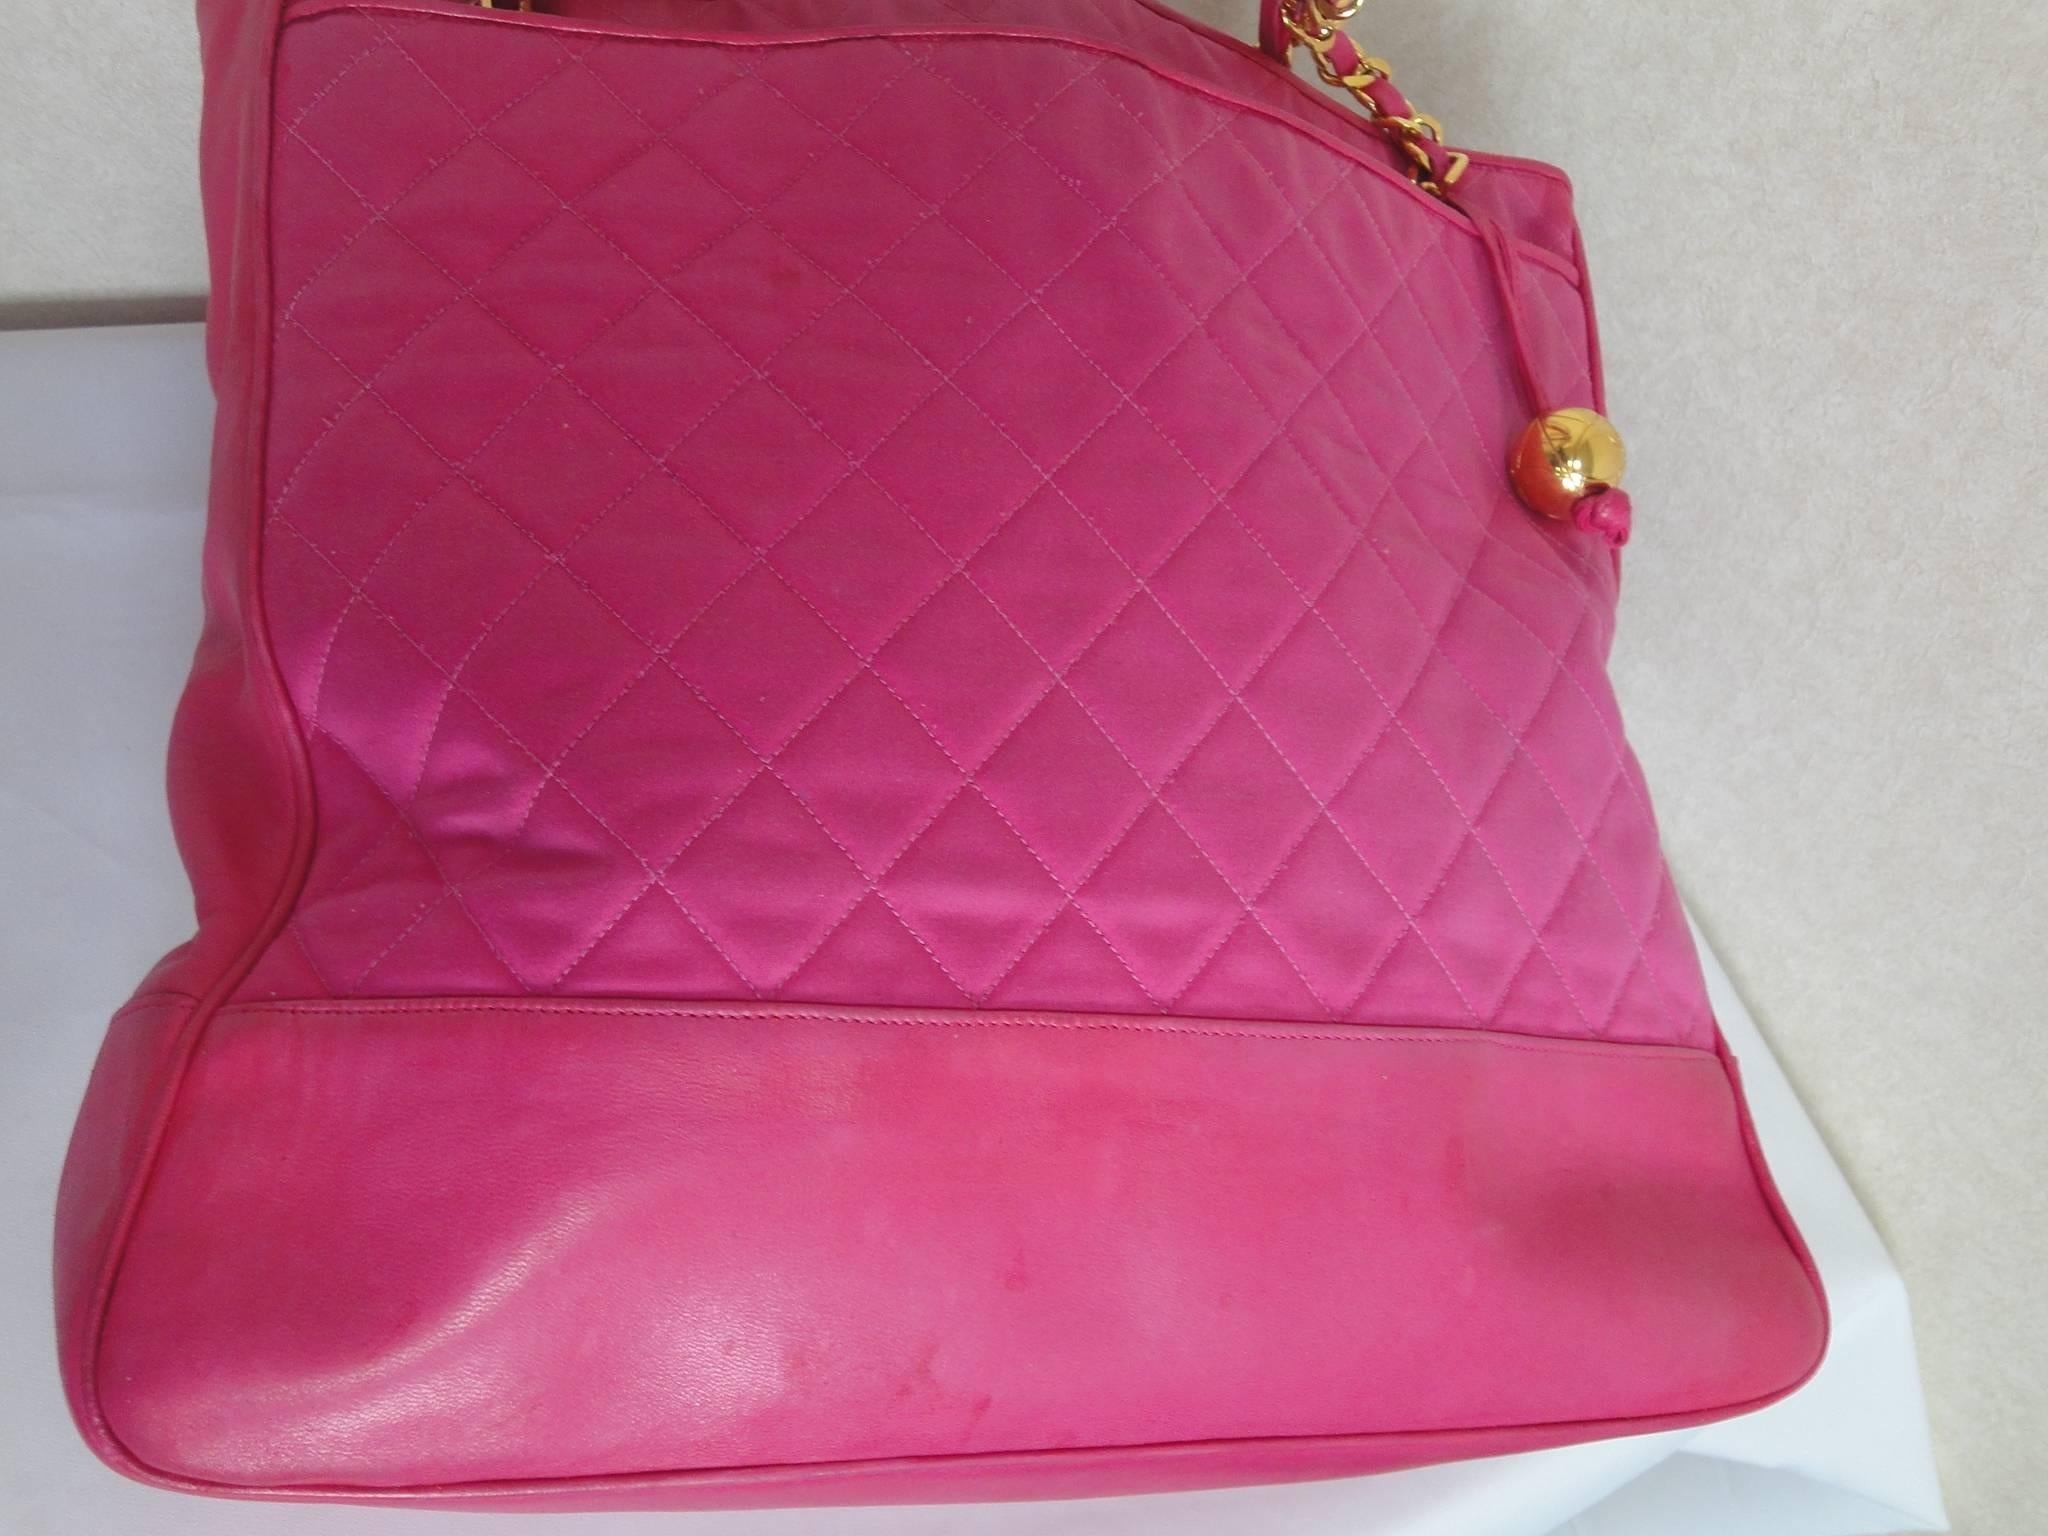 Pink Vintage CHANEL bright pink shoulder tote bag with quilted satin and leather